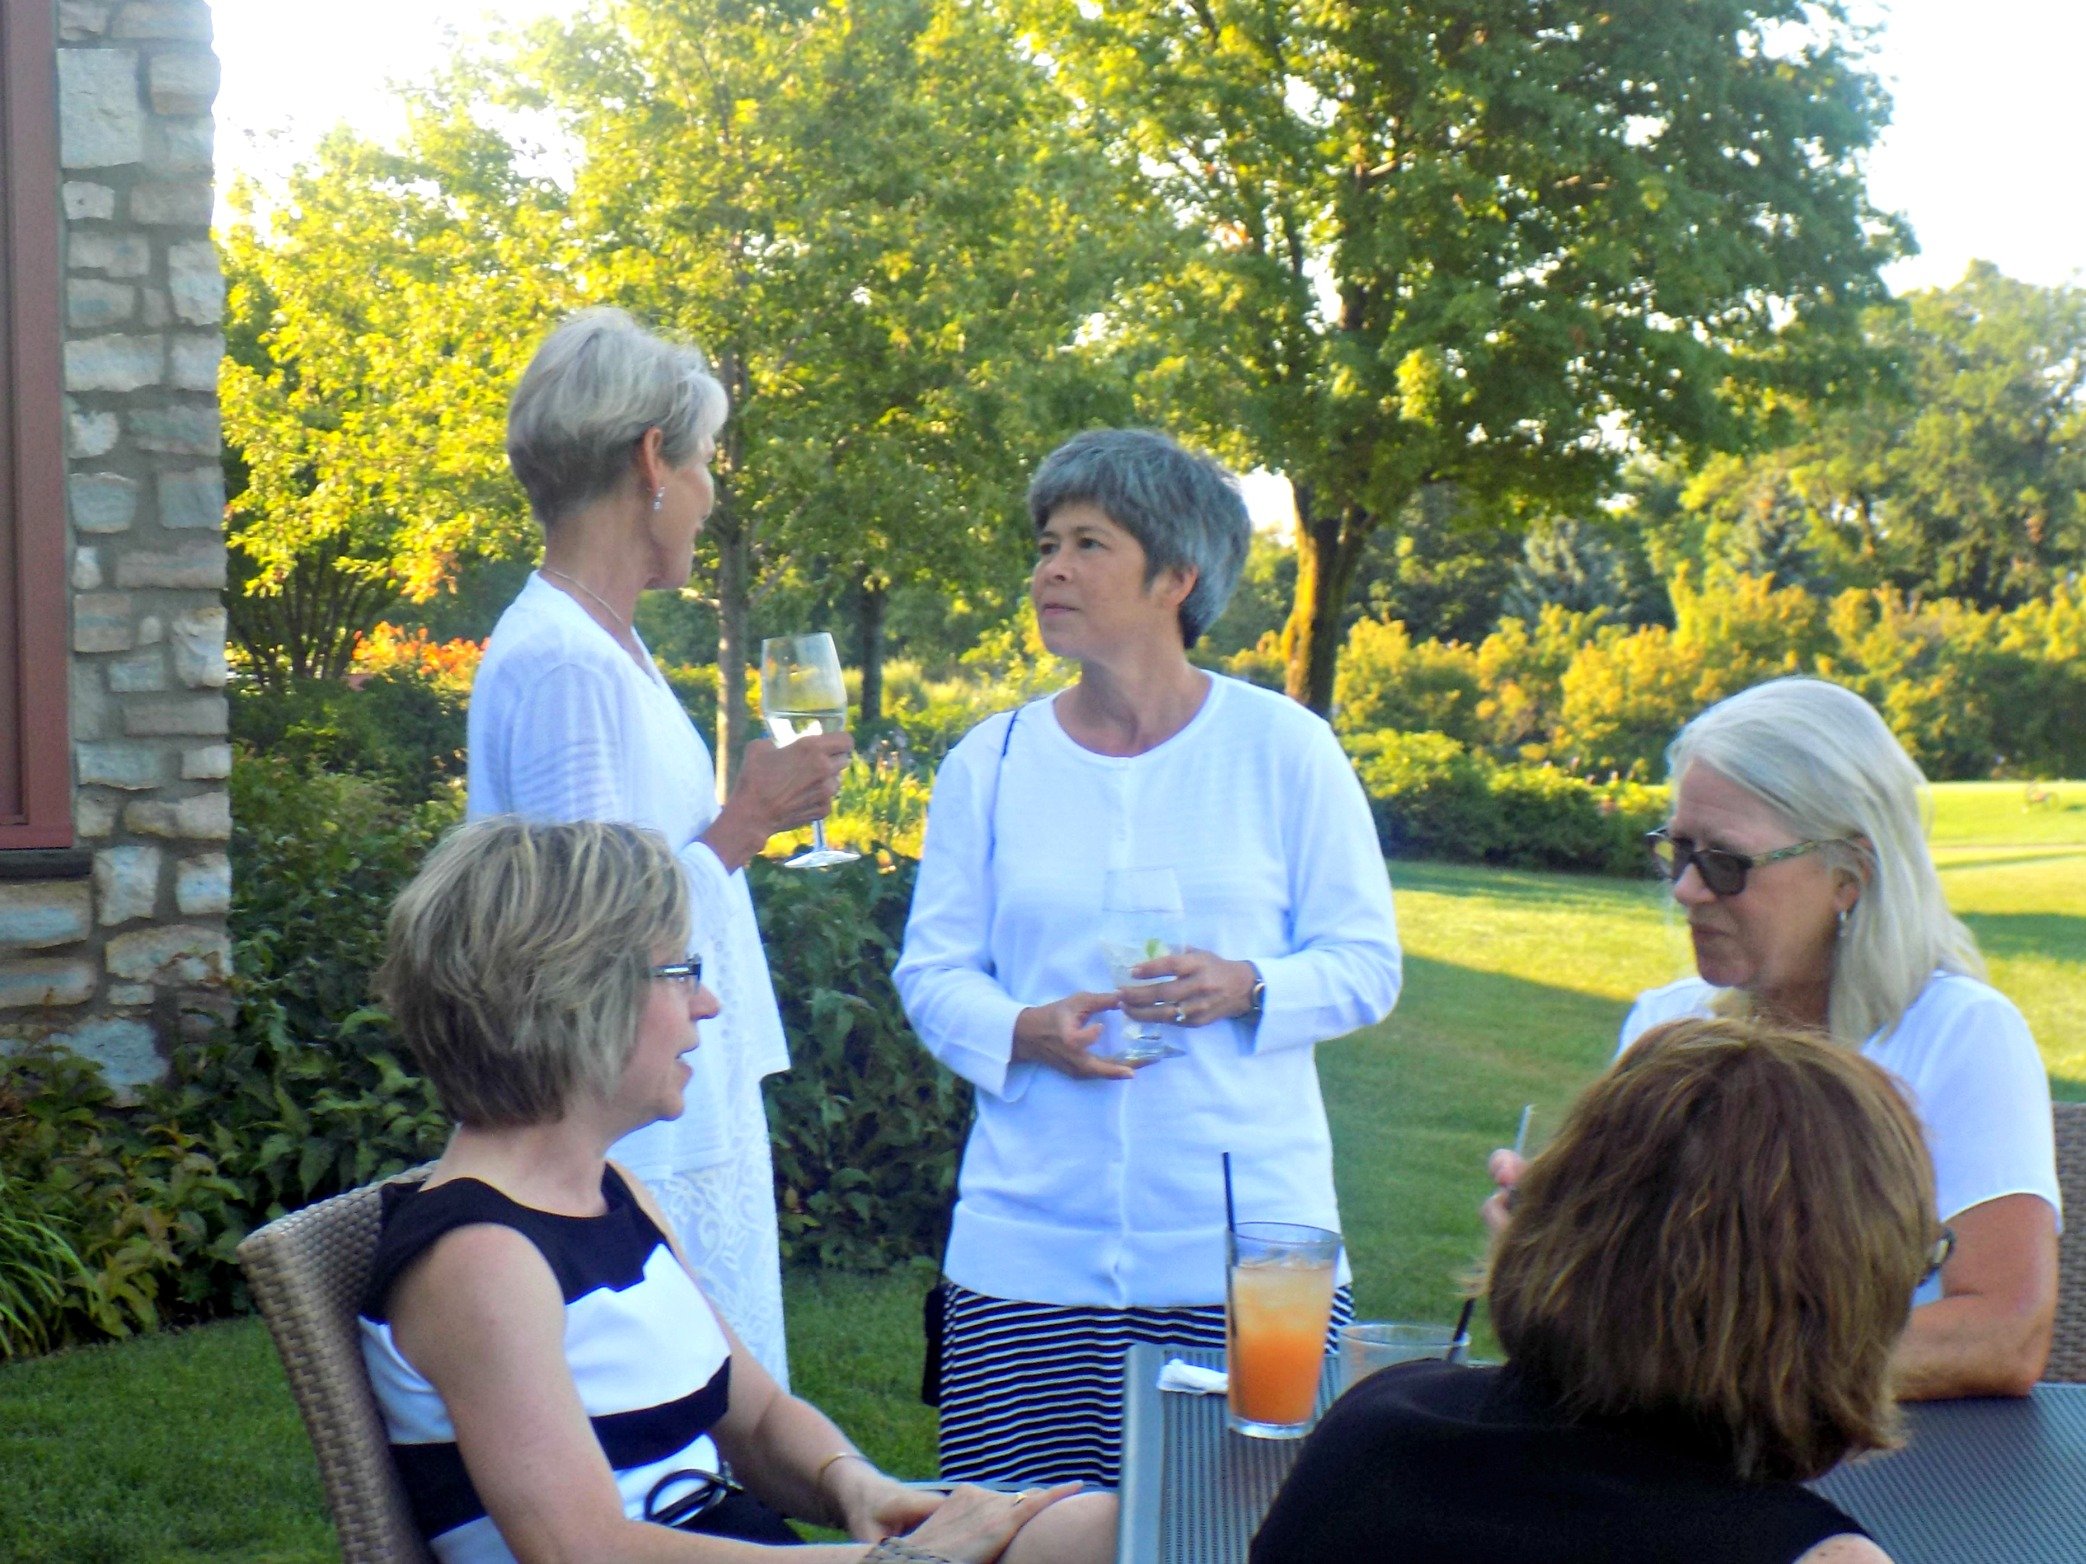 Business women networking after a Links and Drinks golf clinic at Hazeltine National Golf Club